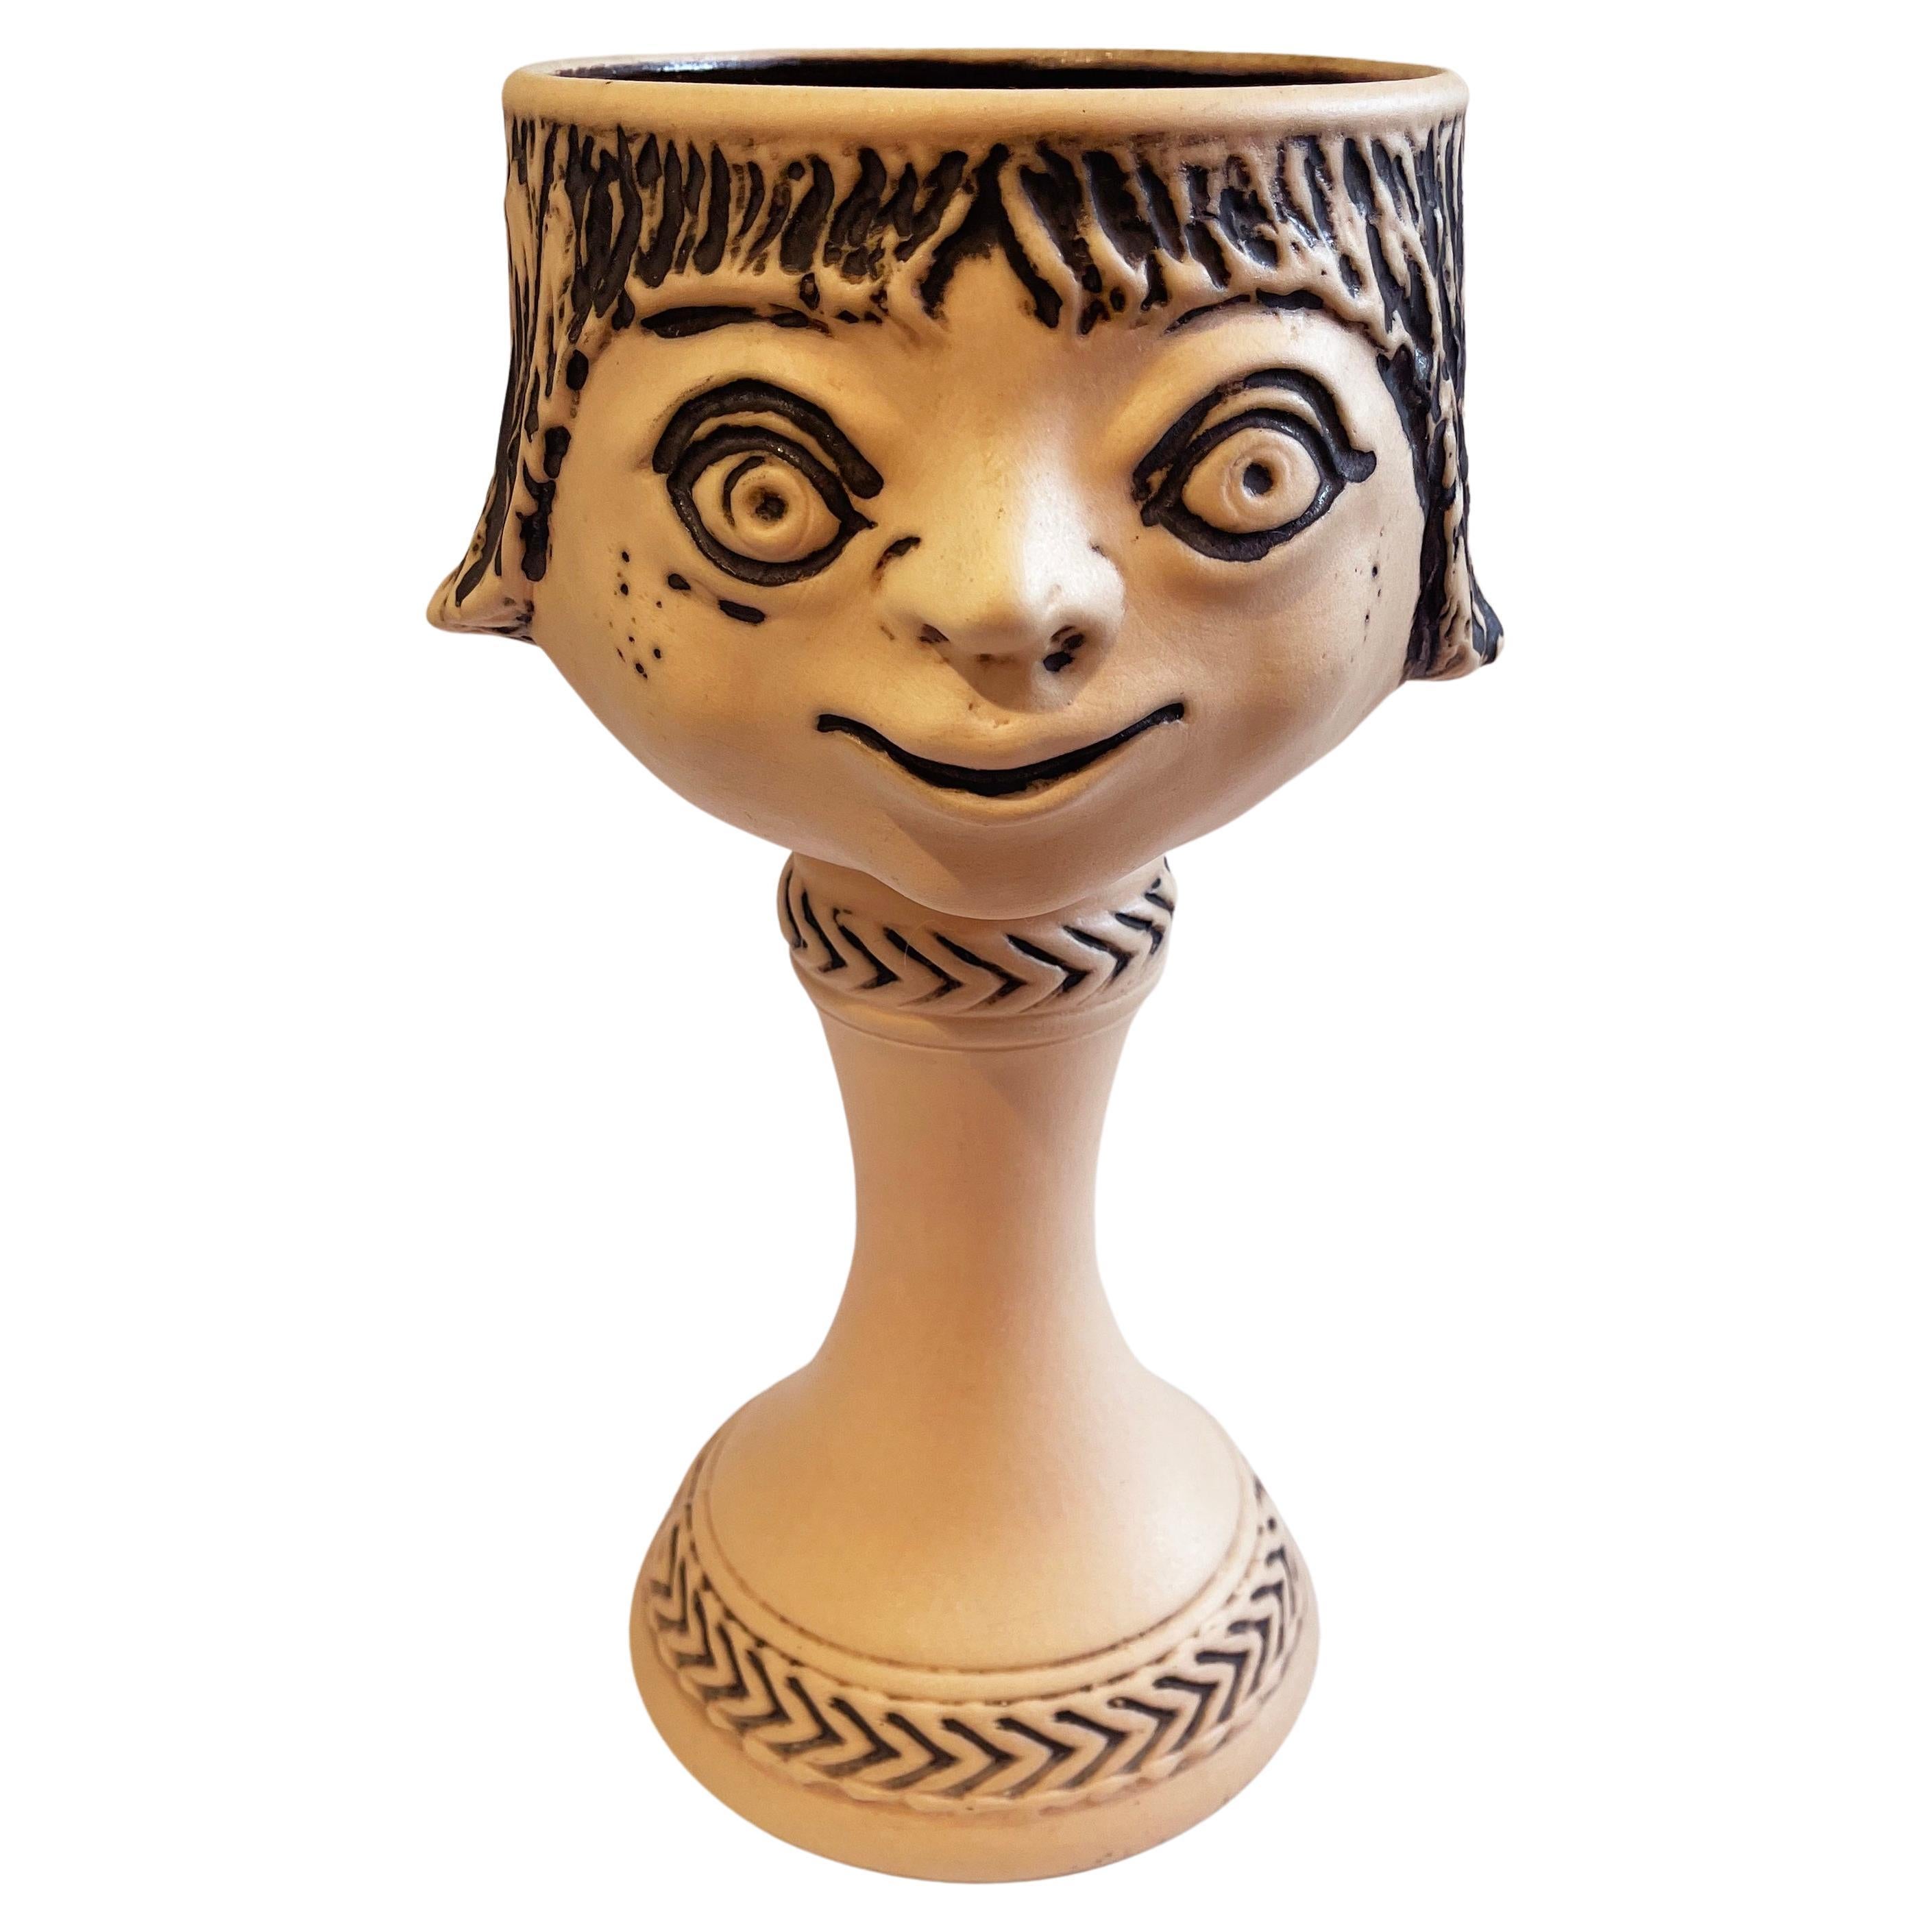 A truly unusual and rare piece of art is this mid-century vase or plant pot by Dümler and Breiden, Western Germany.
A plant with long tangling branches would make it quite exquisite, and with a hint of humour for example a spiky plant or any type of